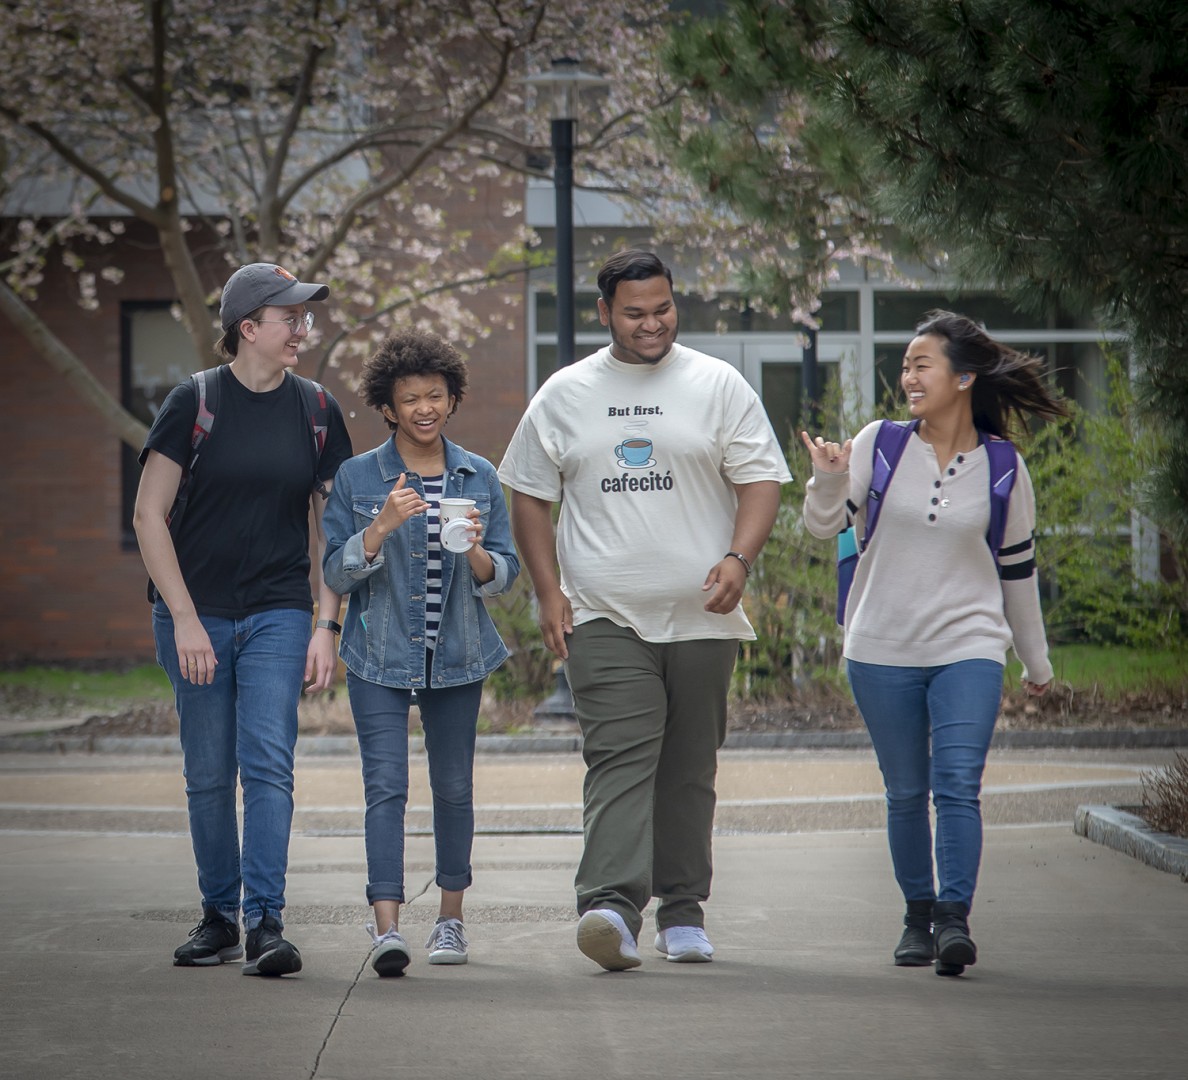 Four students walking on campus in single file.